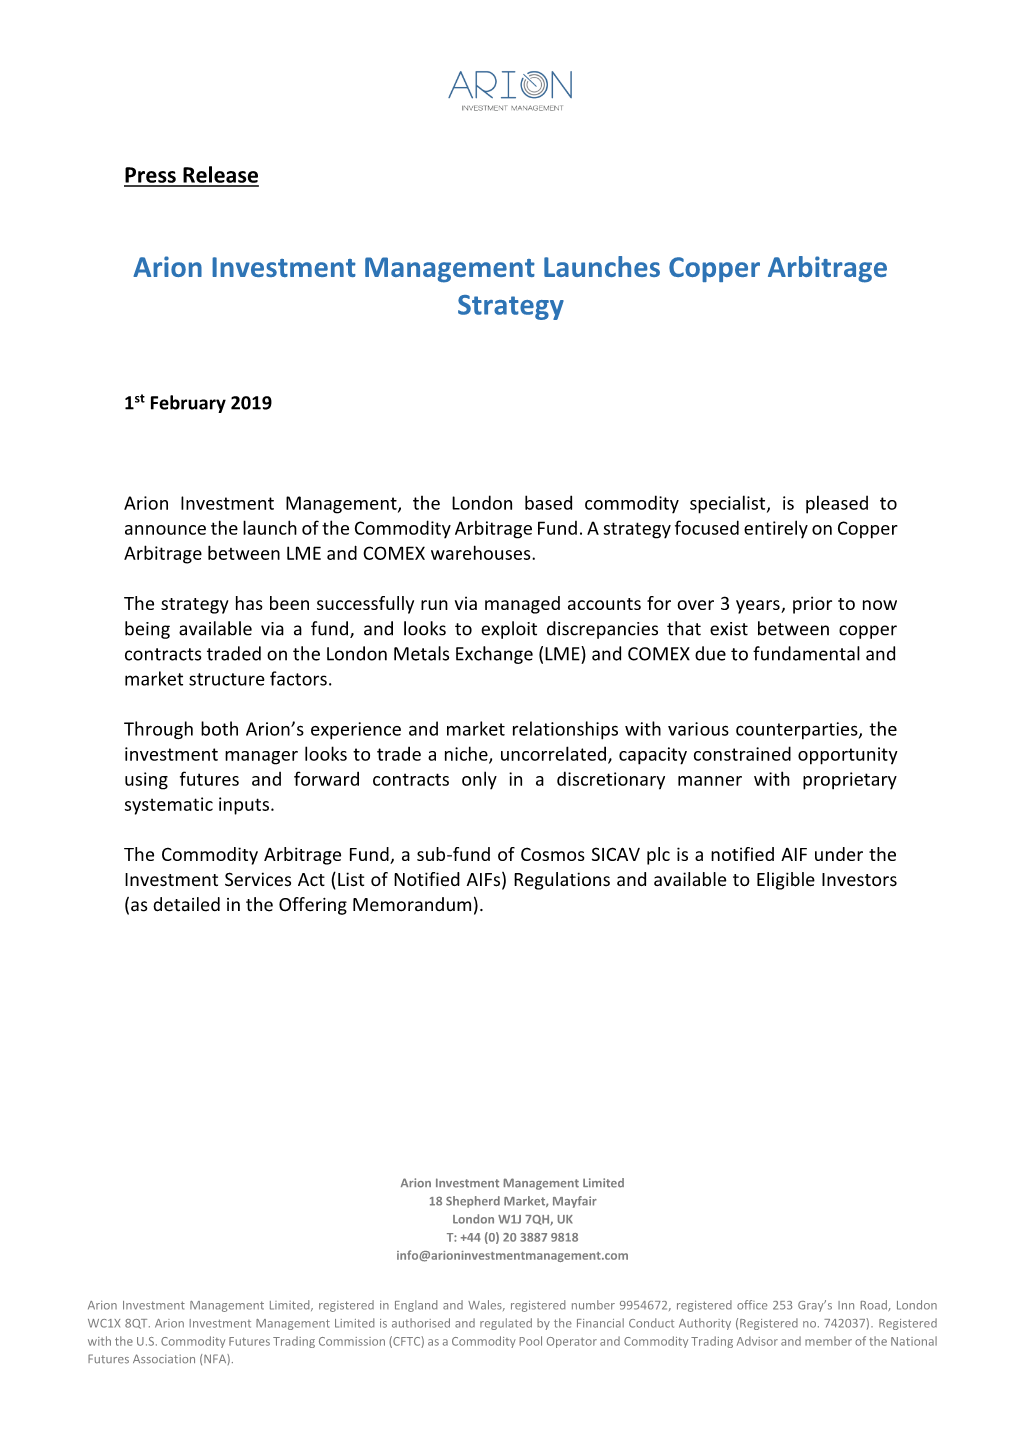 Arion Investment Management Launches Copper Arbitrage Strategy